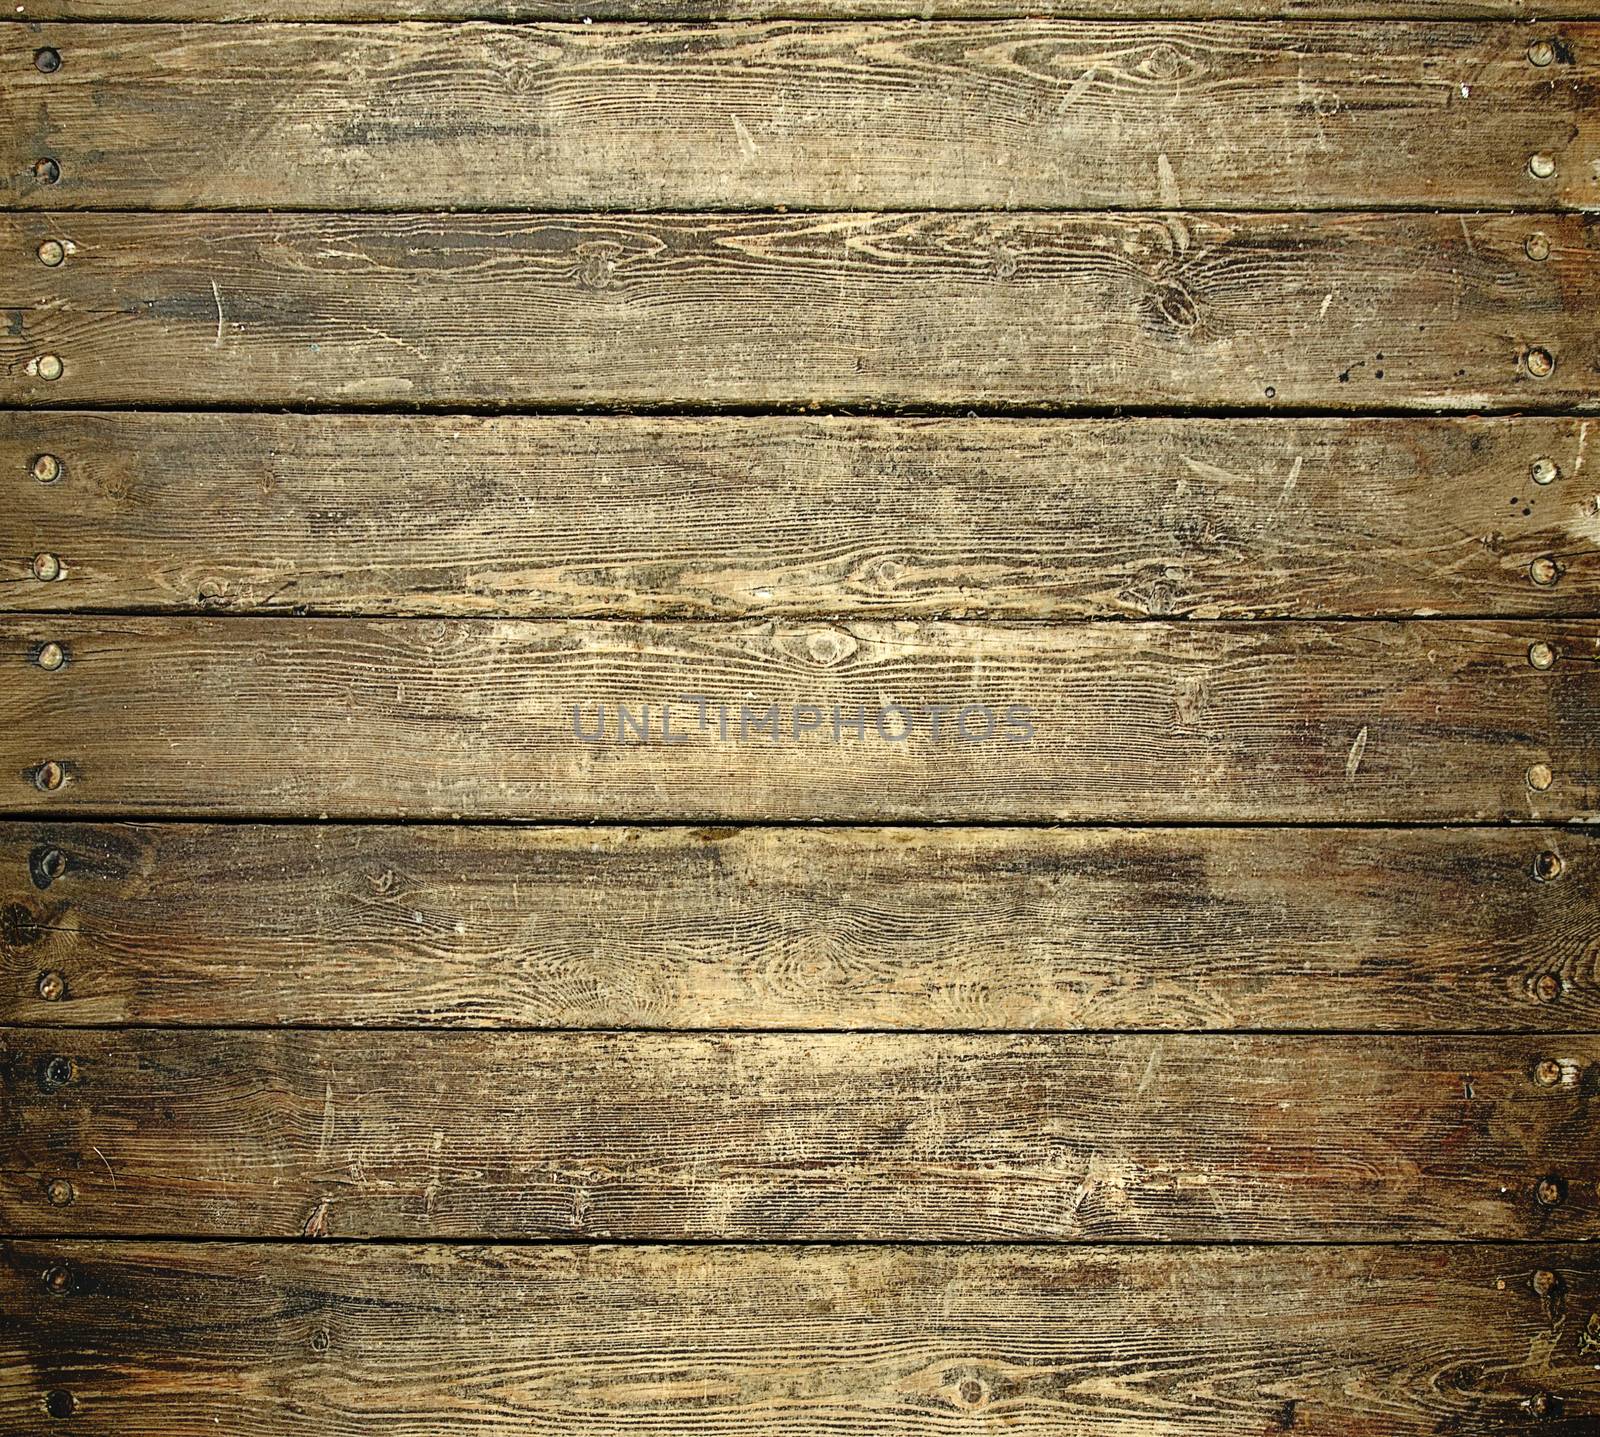 Background of old worn wooden planks with nails by pt-home